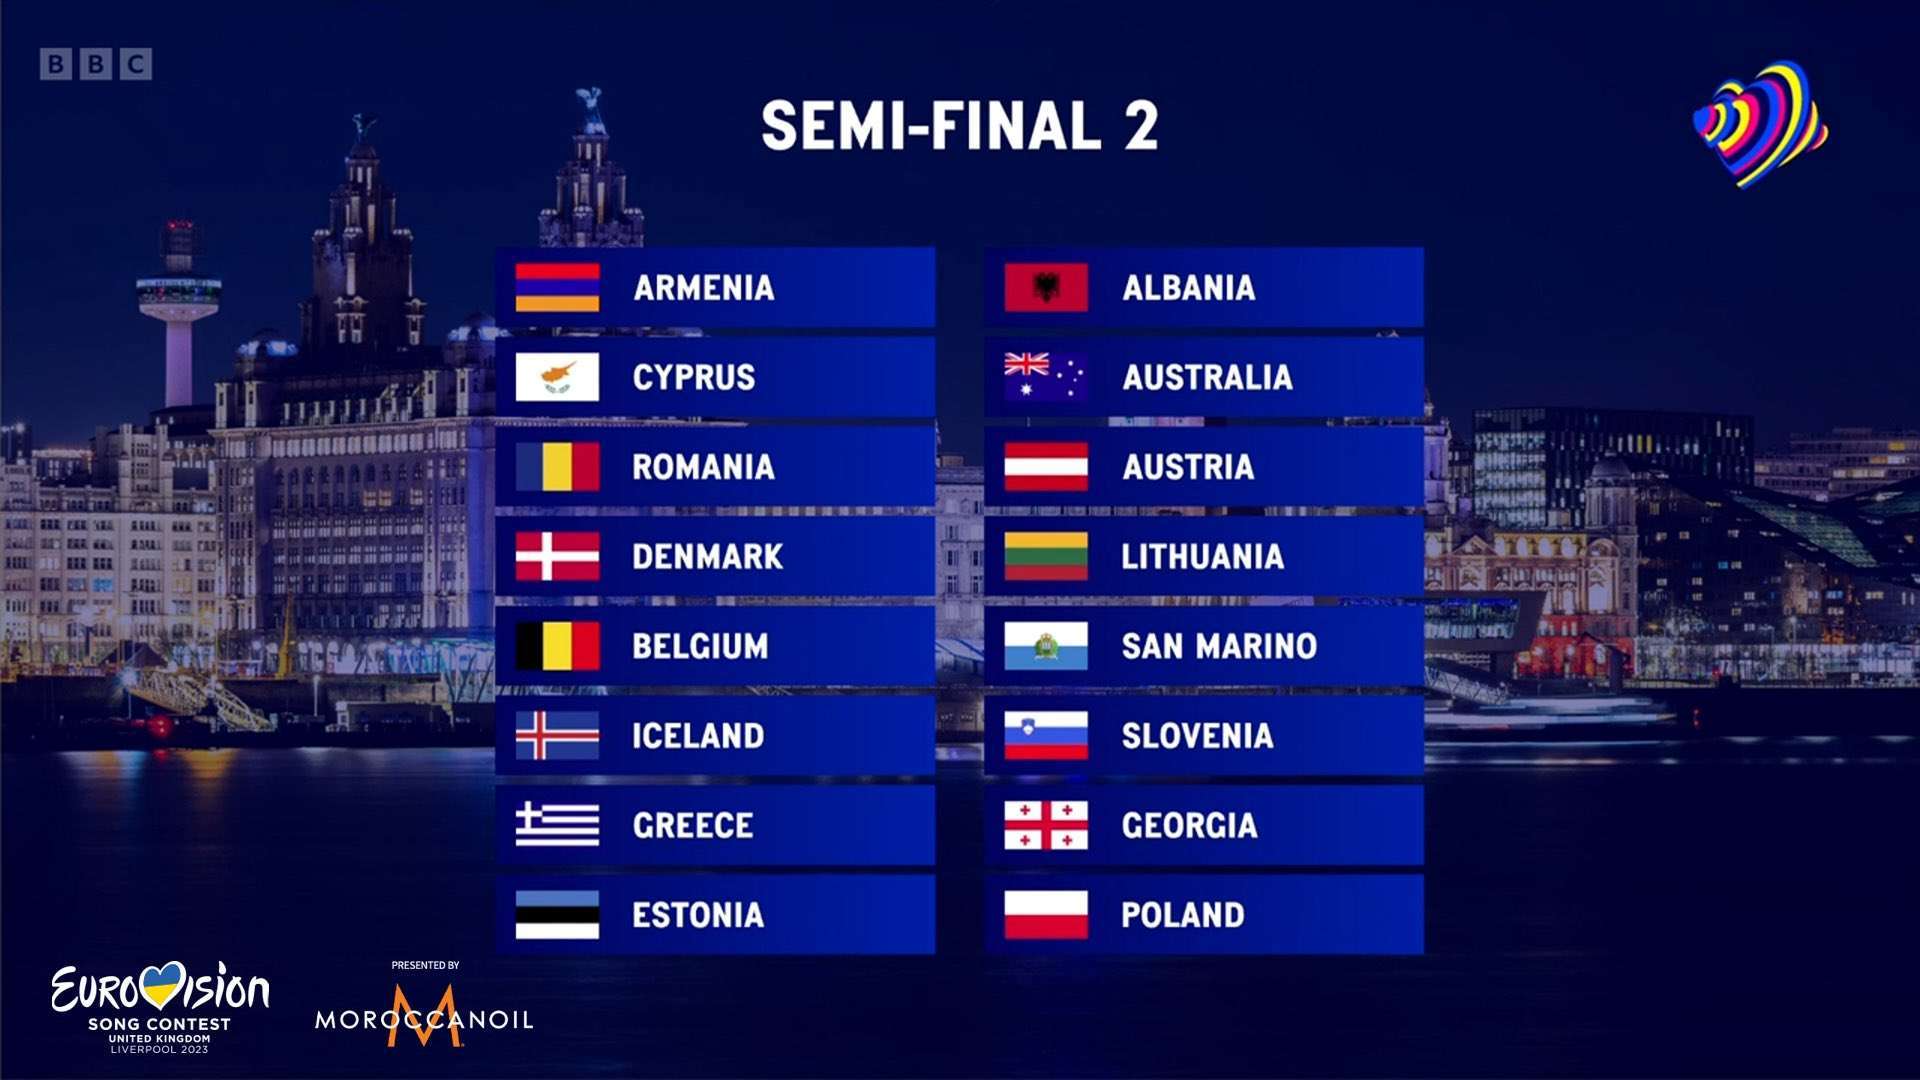 Eurovision 2023 SemiFinal running orders will be revealed tomorrow